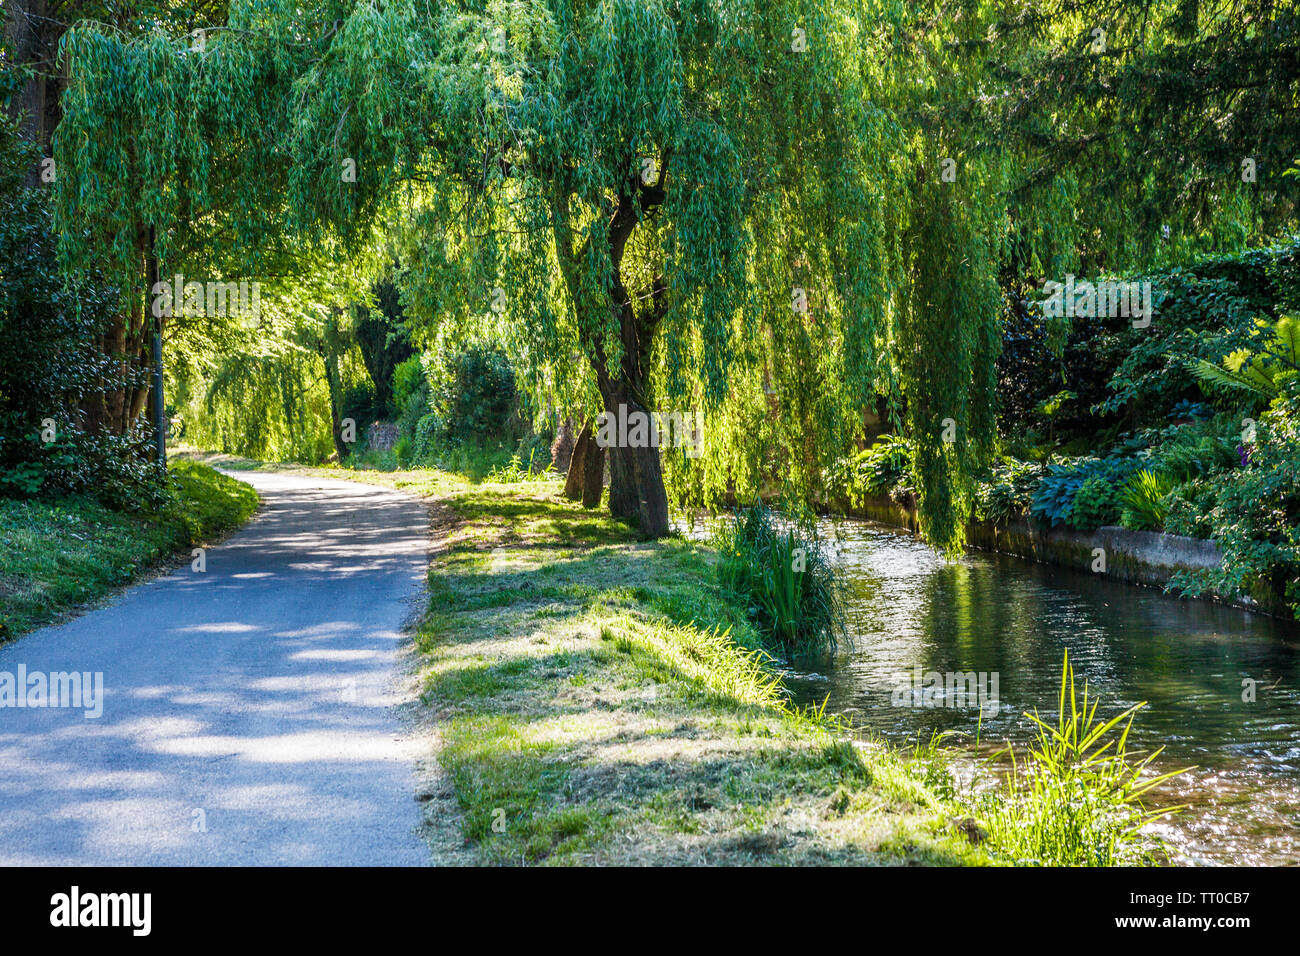 A small lane known as the Bow Wow running alongside the River Churn in the Cotswold village of South Cerney in Gloucestershire. Stock Photo